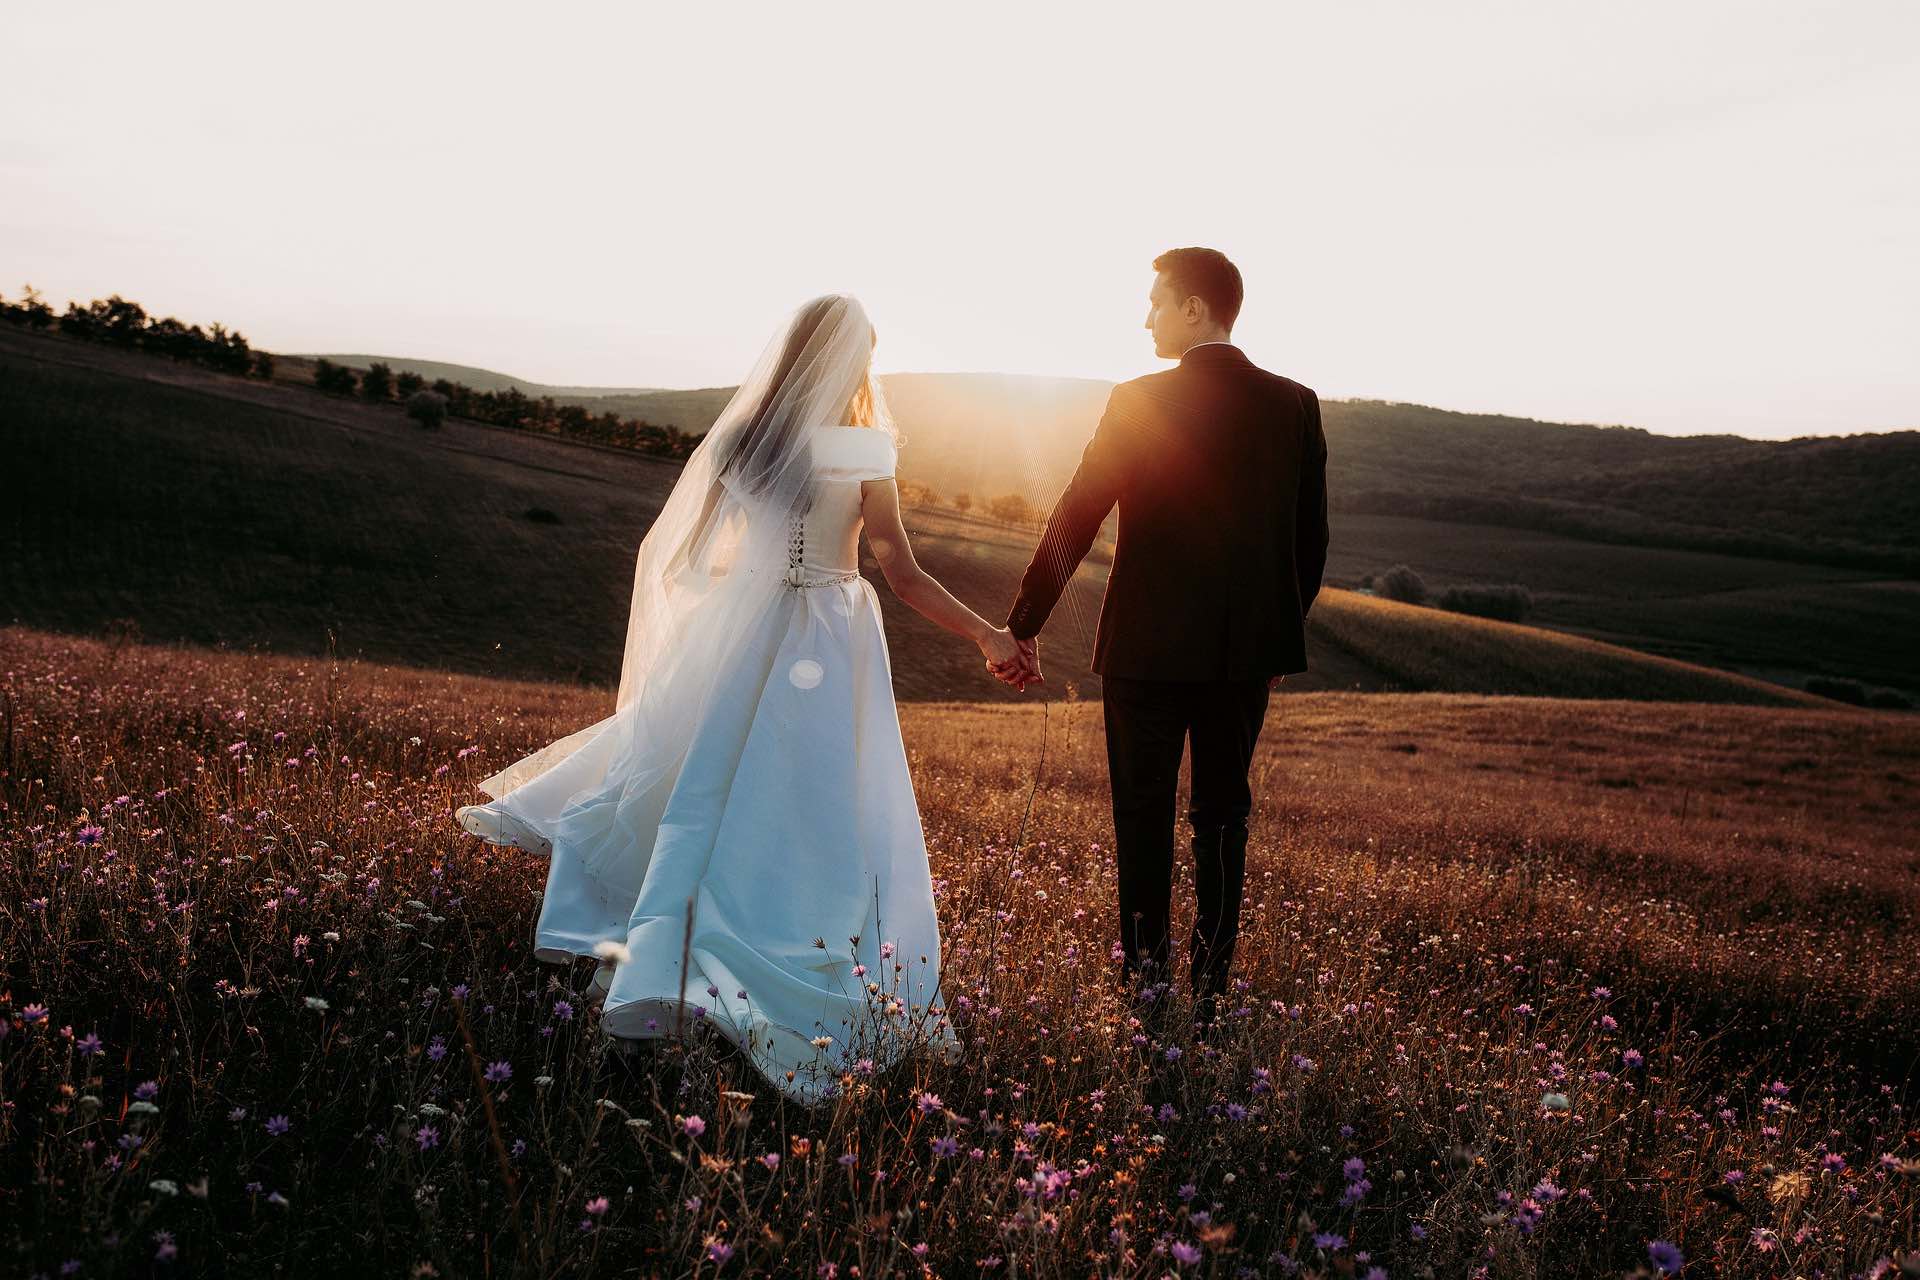 Bride and groom walking in a field at sunset on the Archangel Law Group website Family Law page